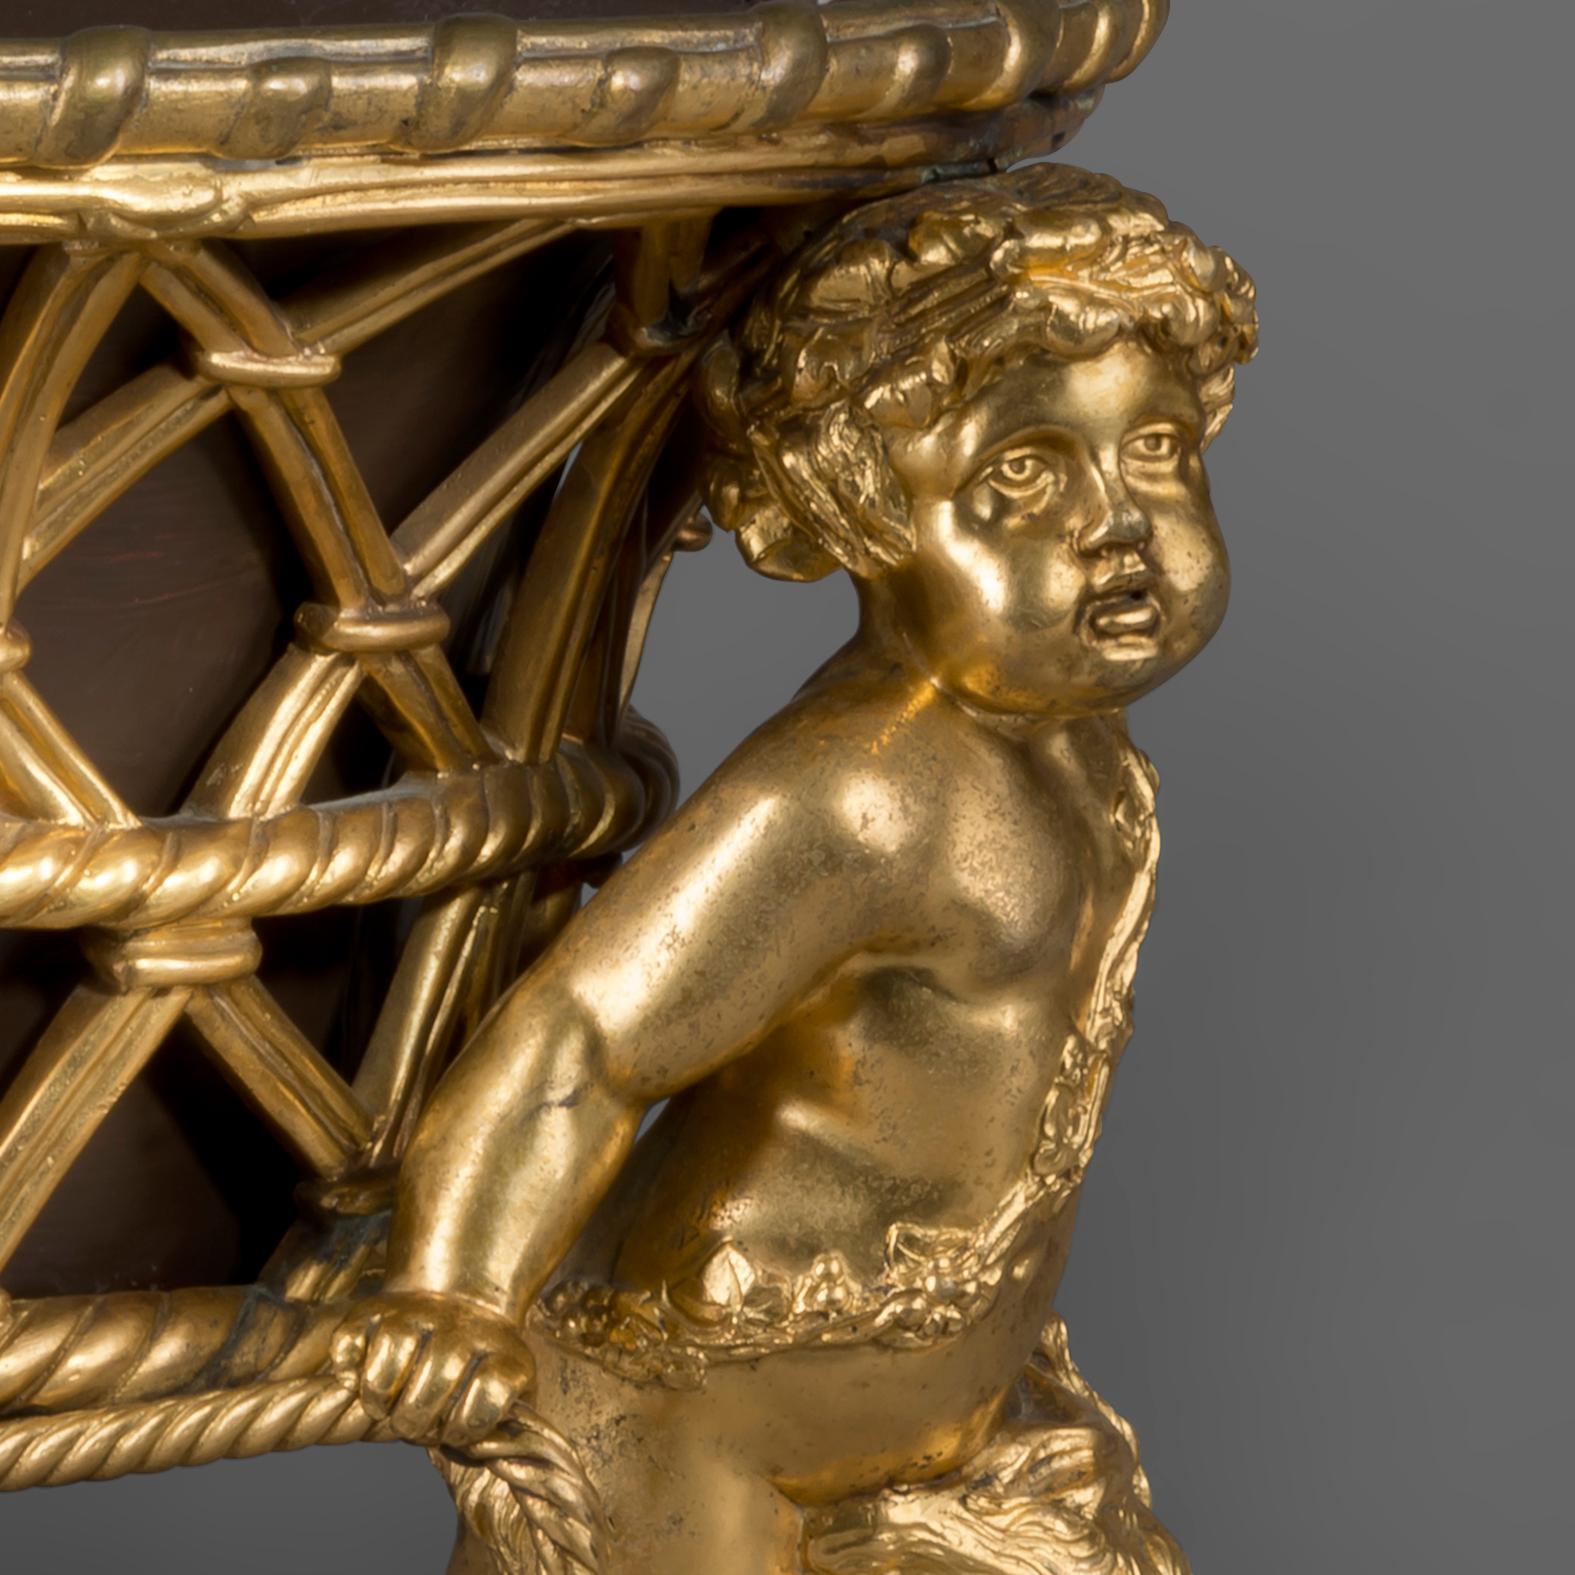 A Louis XV style gilt bronze Jardinière by Maison Alphonse Giroux.

Stamped 'Maison Alph GIROUX' a Paris'.

This elegant jardinière is in the form of an oval basket suspended between ropes by two finely cast putti. The jardinière retains its